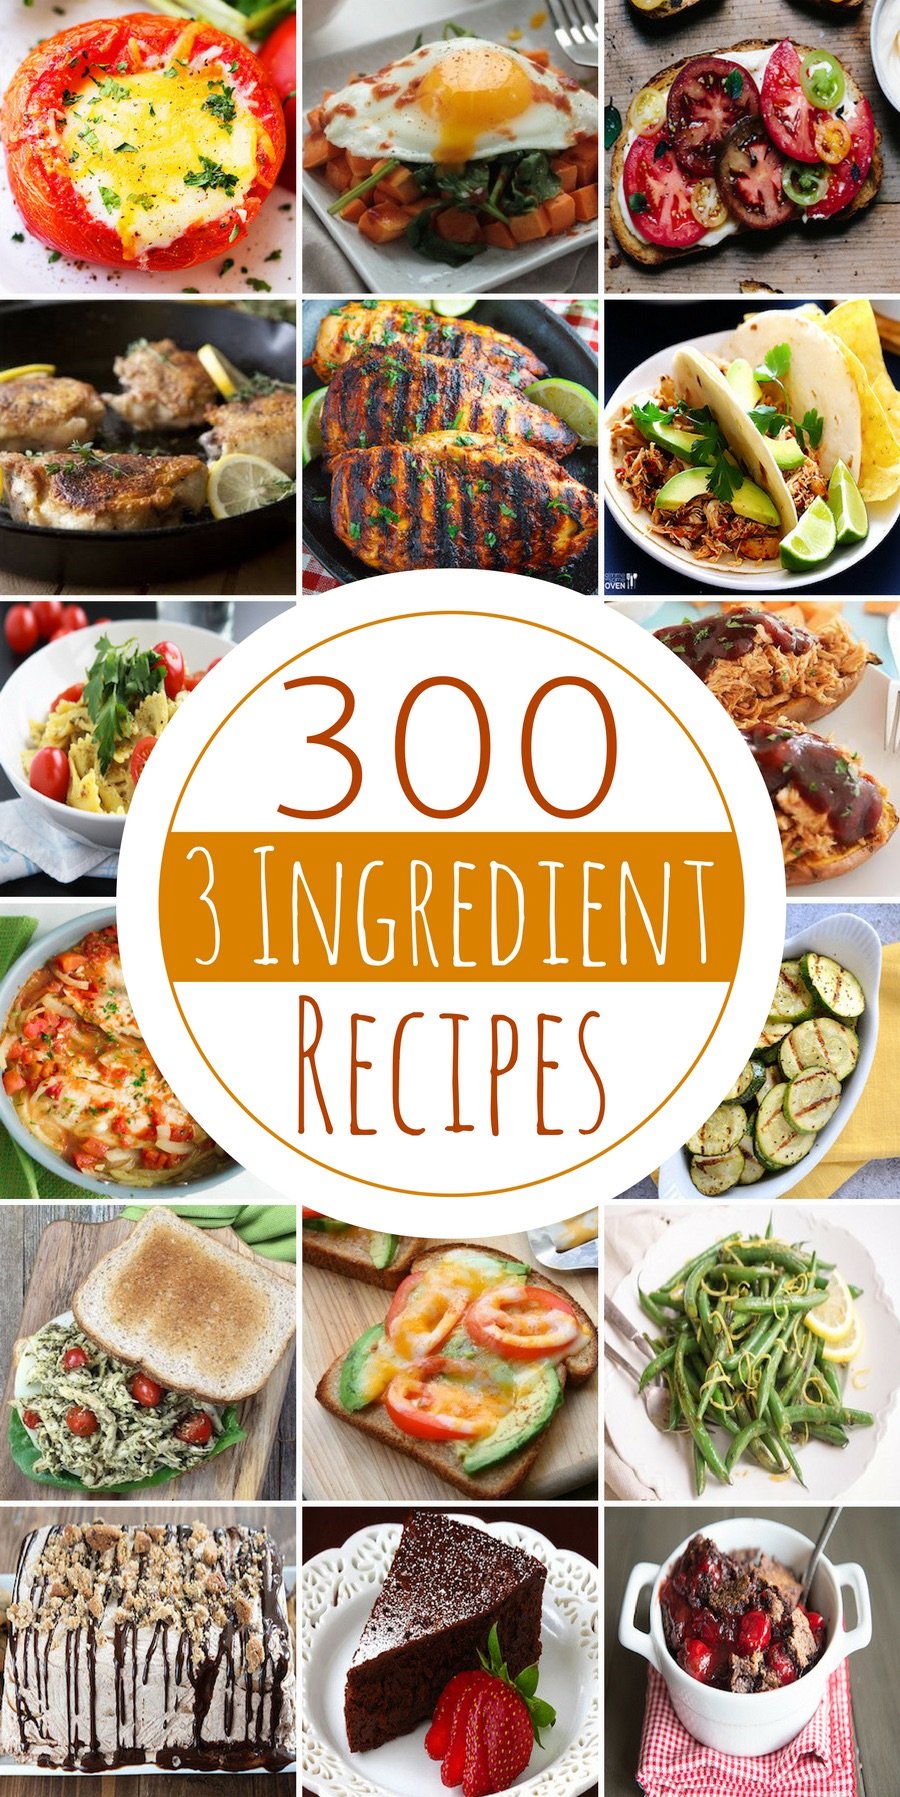 300 3-Ingredient Recipes | Prudent Penny Pincher